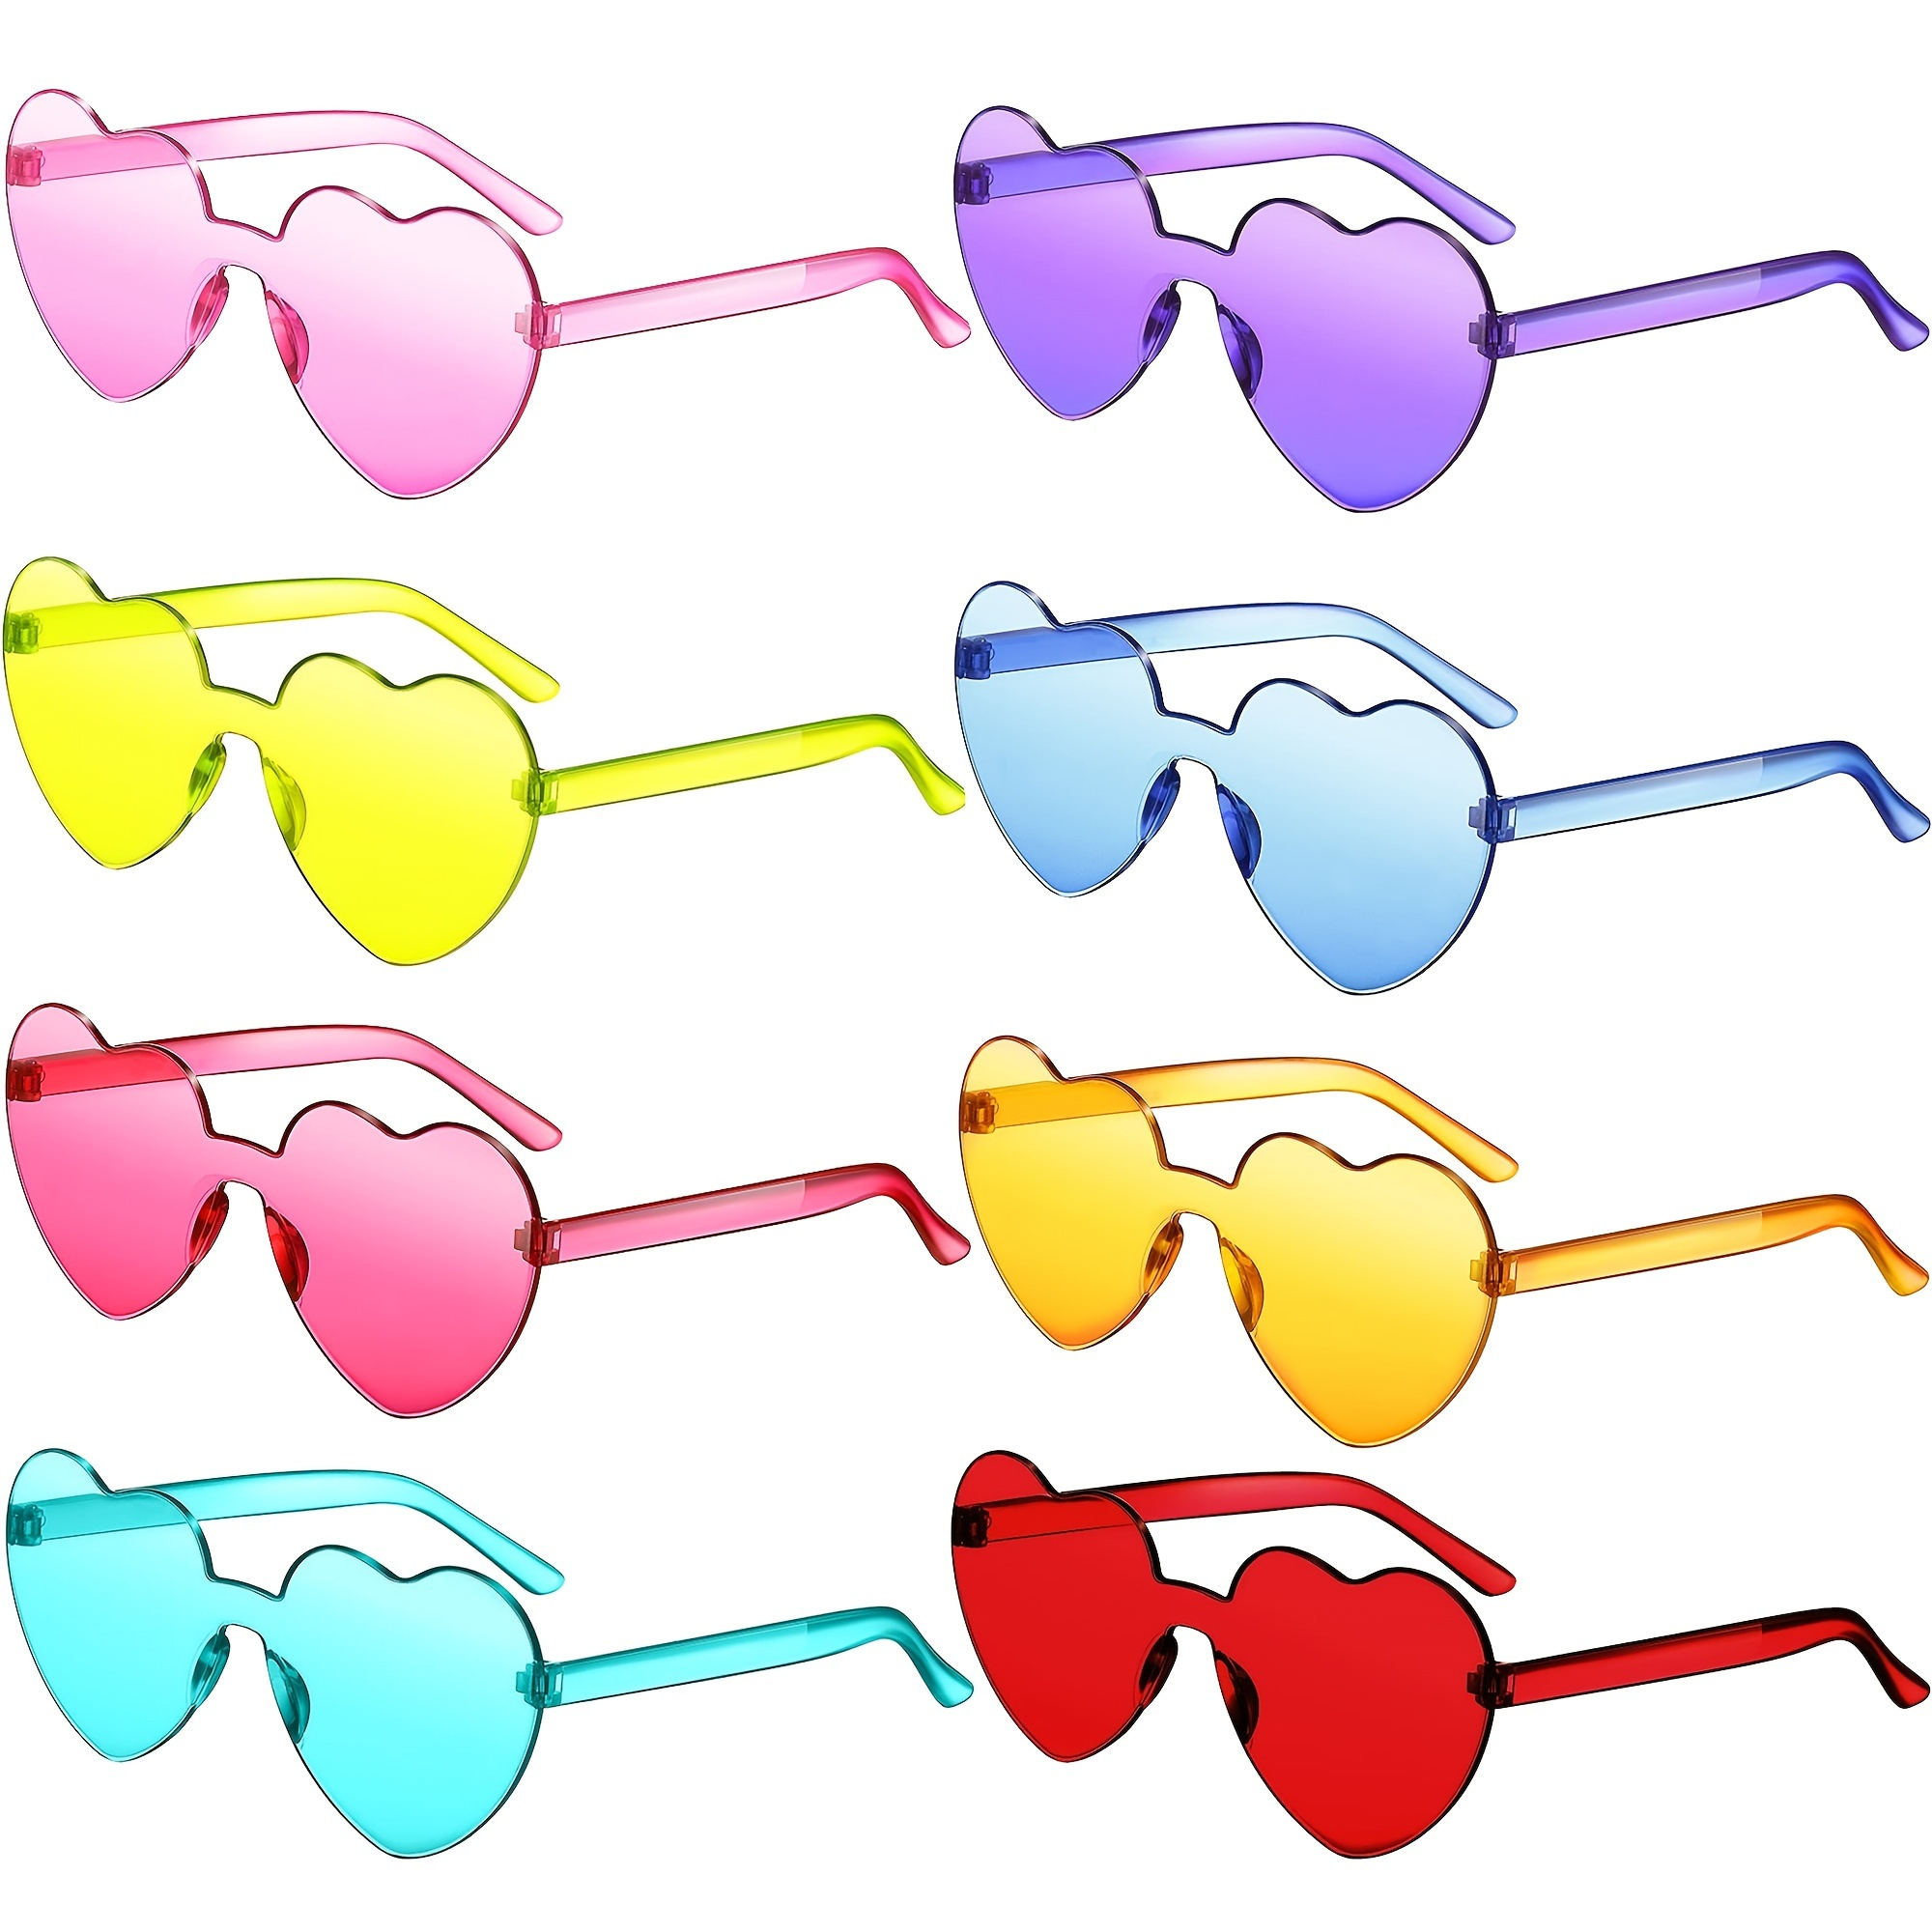 

8pcs Rimless Fashion Glasses Heart Shaped Frameless Glasses Trendy Transparent Candy Color Eyewear For Party Favor